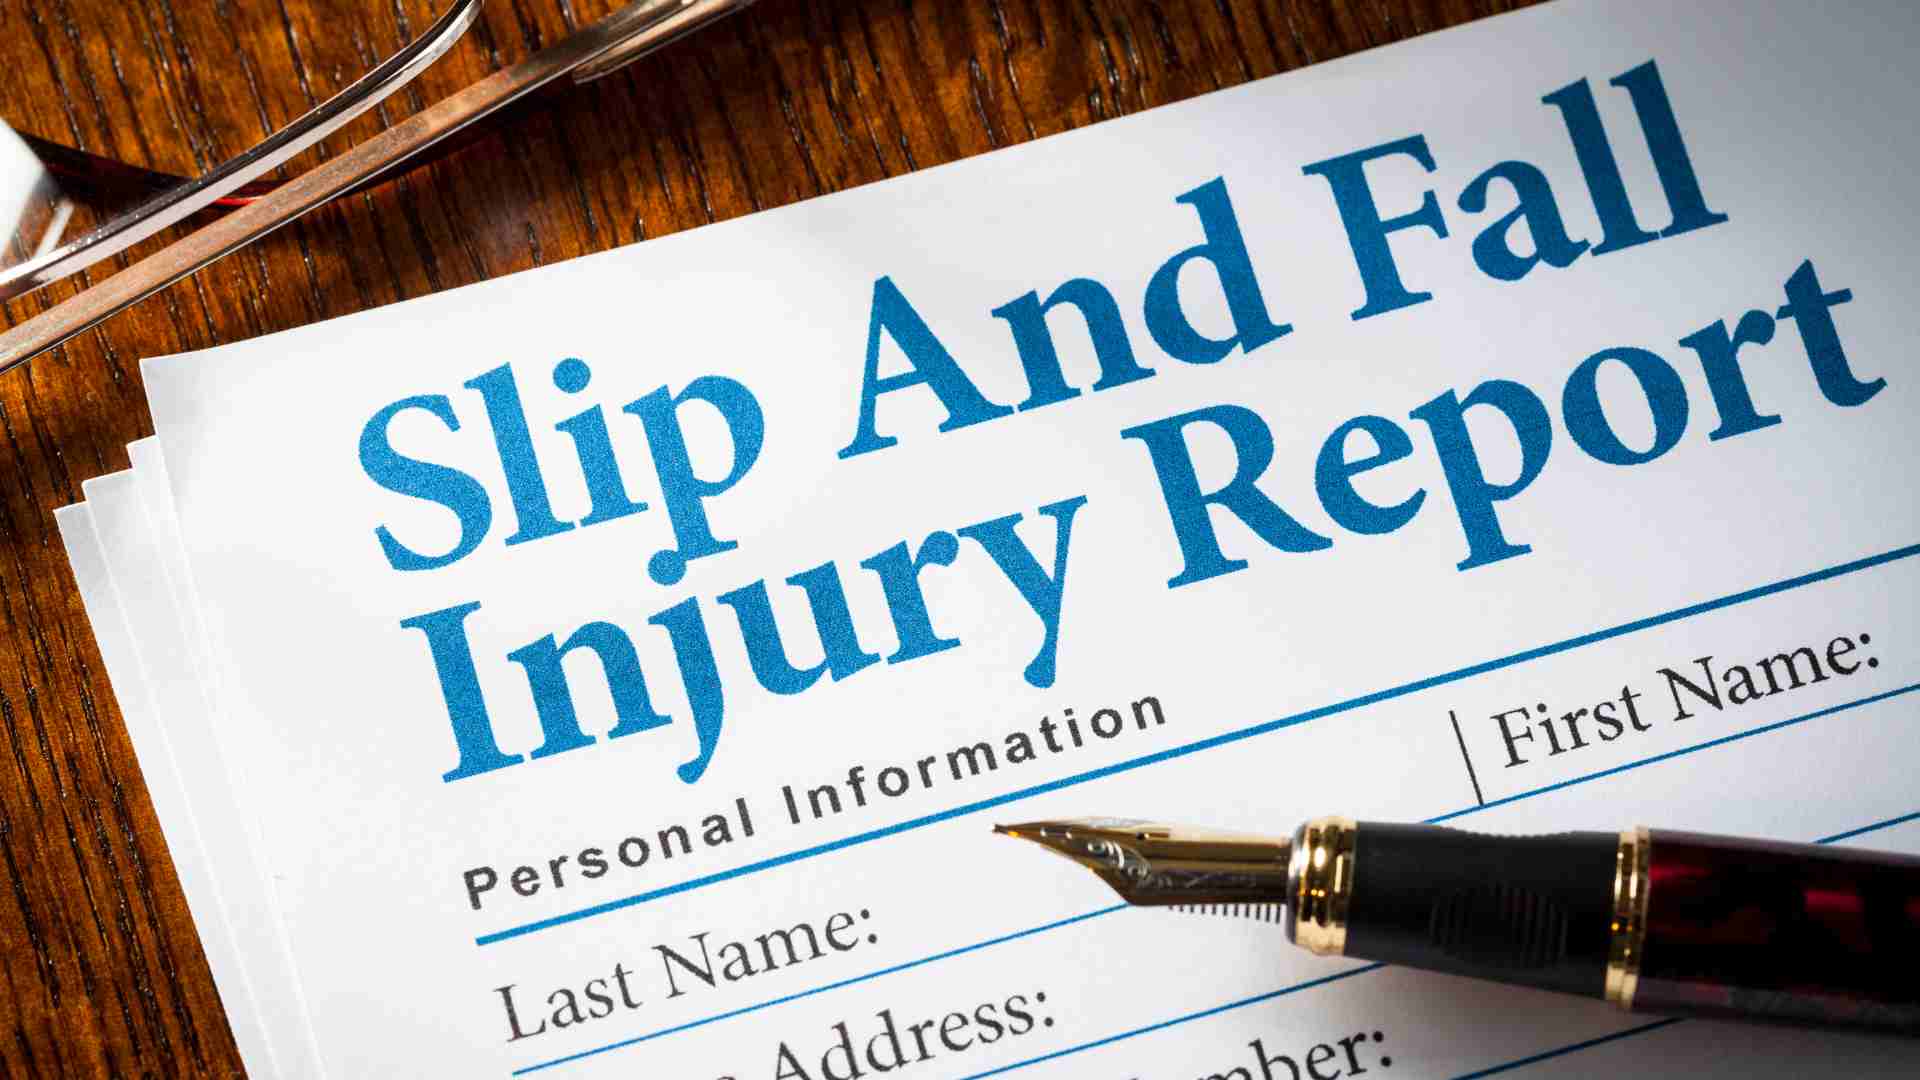 6 of the Most Common Slip and Fall Injuries article thumbnail